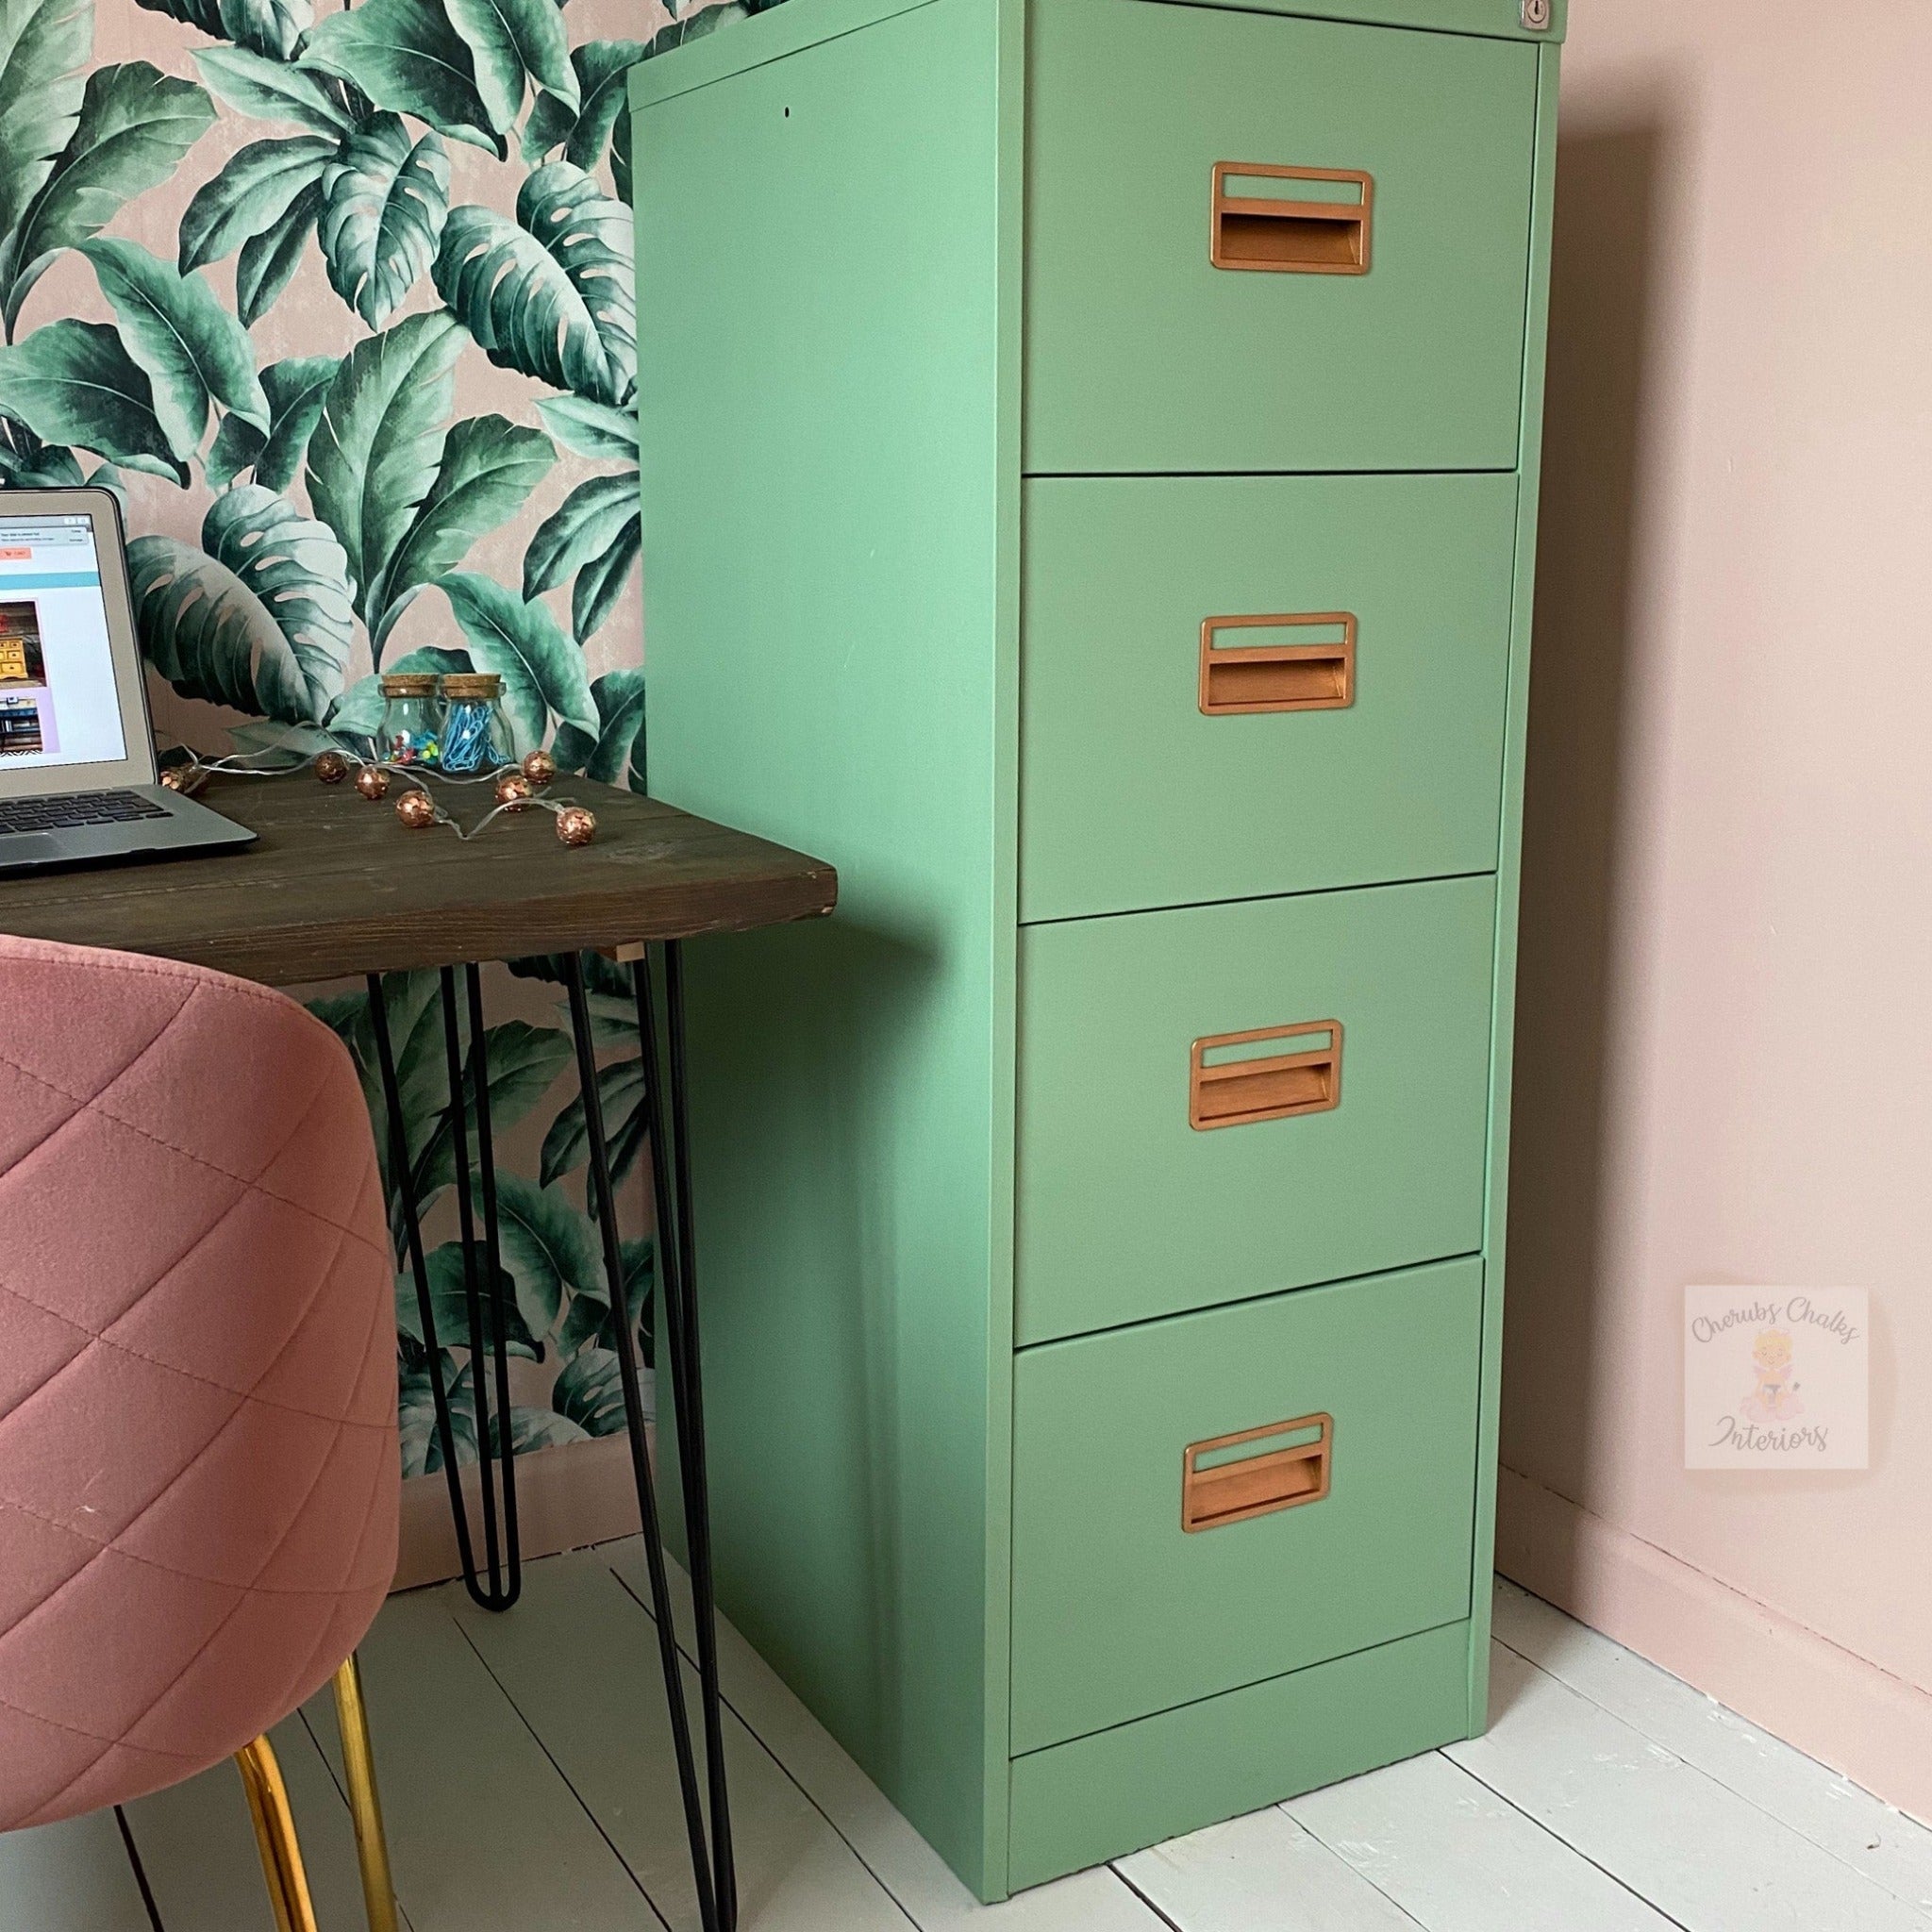 A 4-drawer metal file cabinet refurbished by Cherubs Chalks Interiors is painted in Dixie Belle's Mint Julep chalk mineral paint.